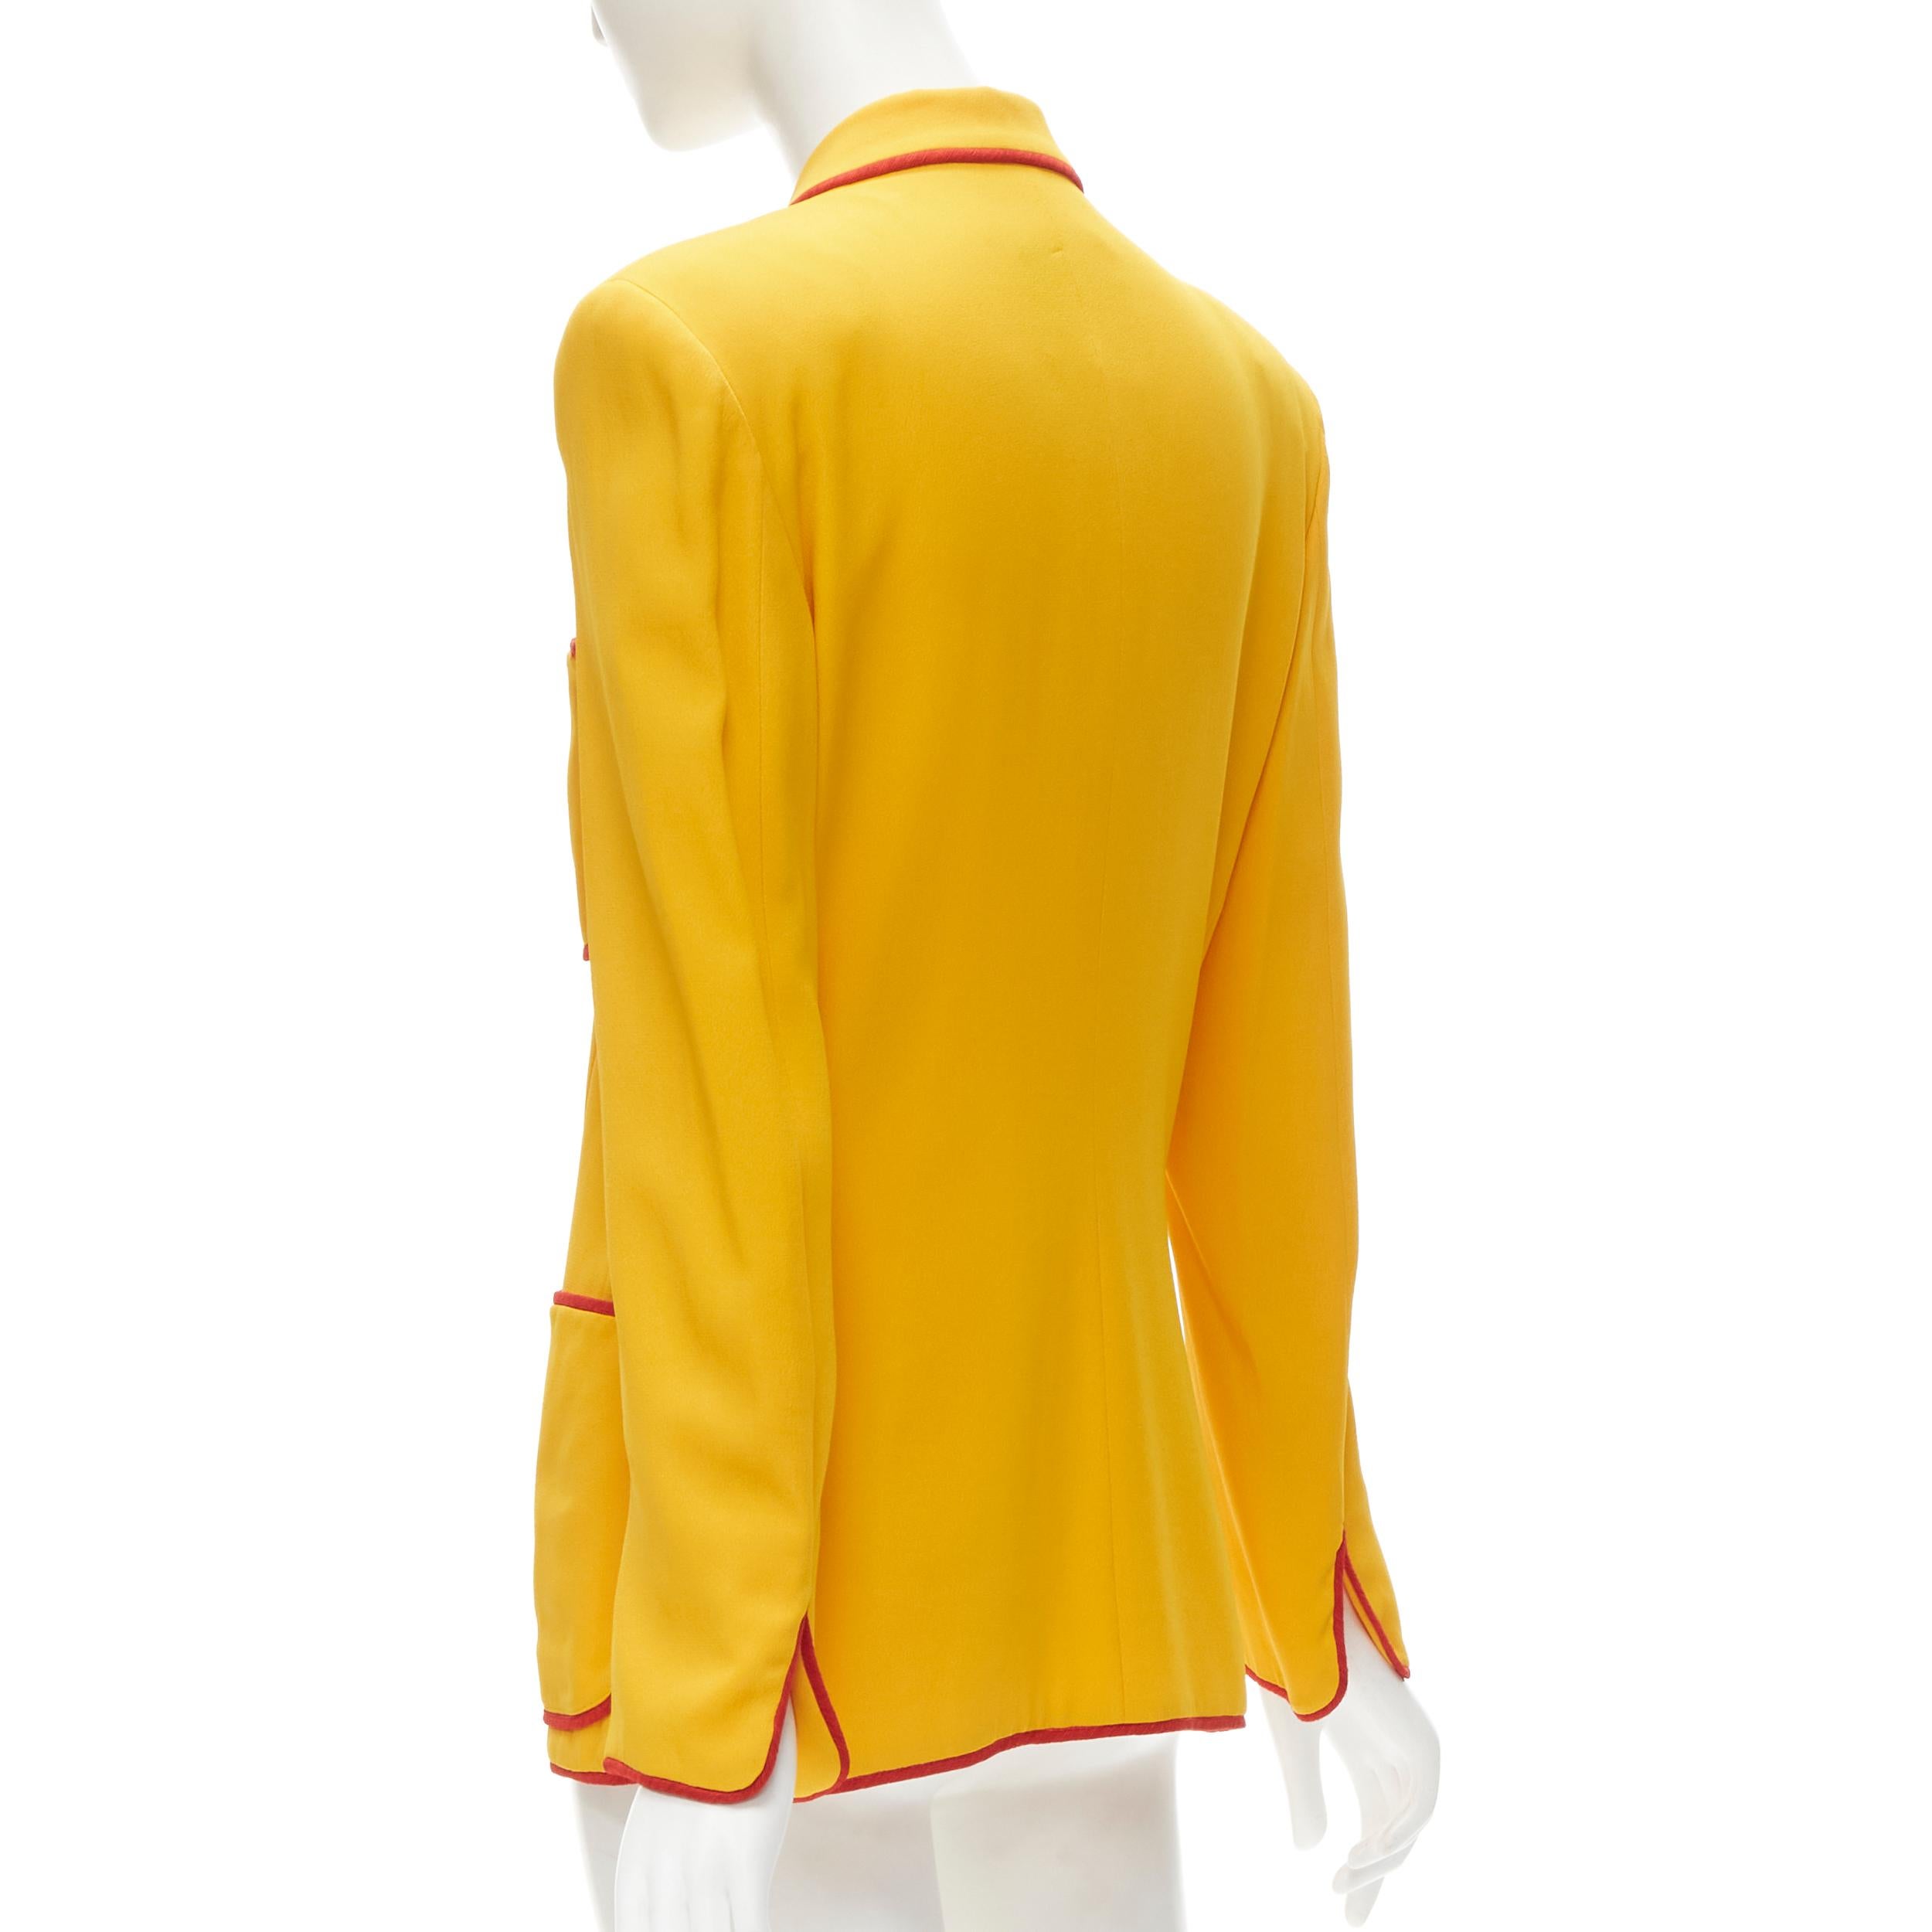 MOSCHINO CHEAP CHIC Vintage yellow red trim 4-pocket blazer jacket IT44 L For Sale 2